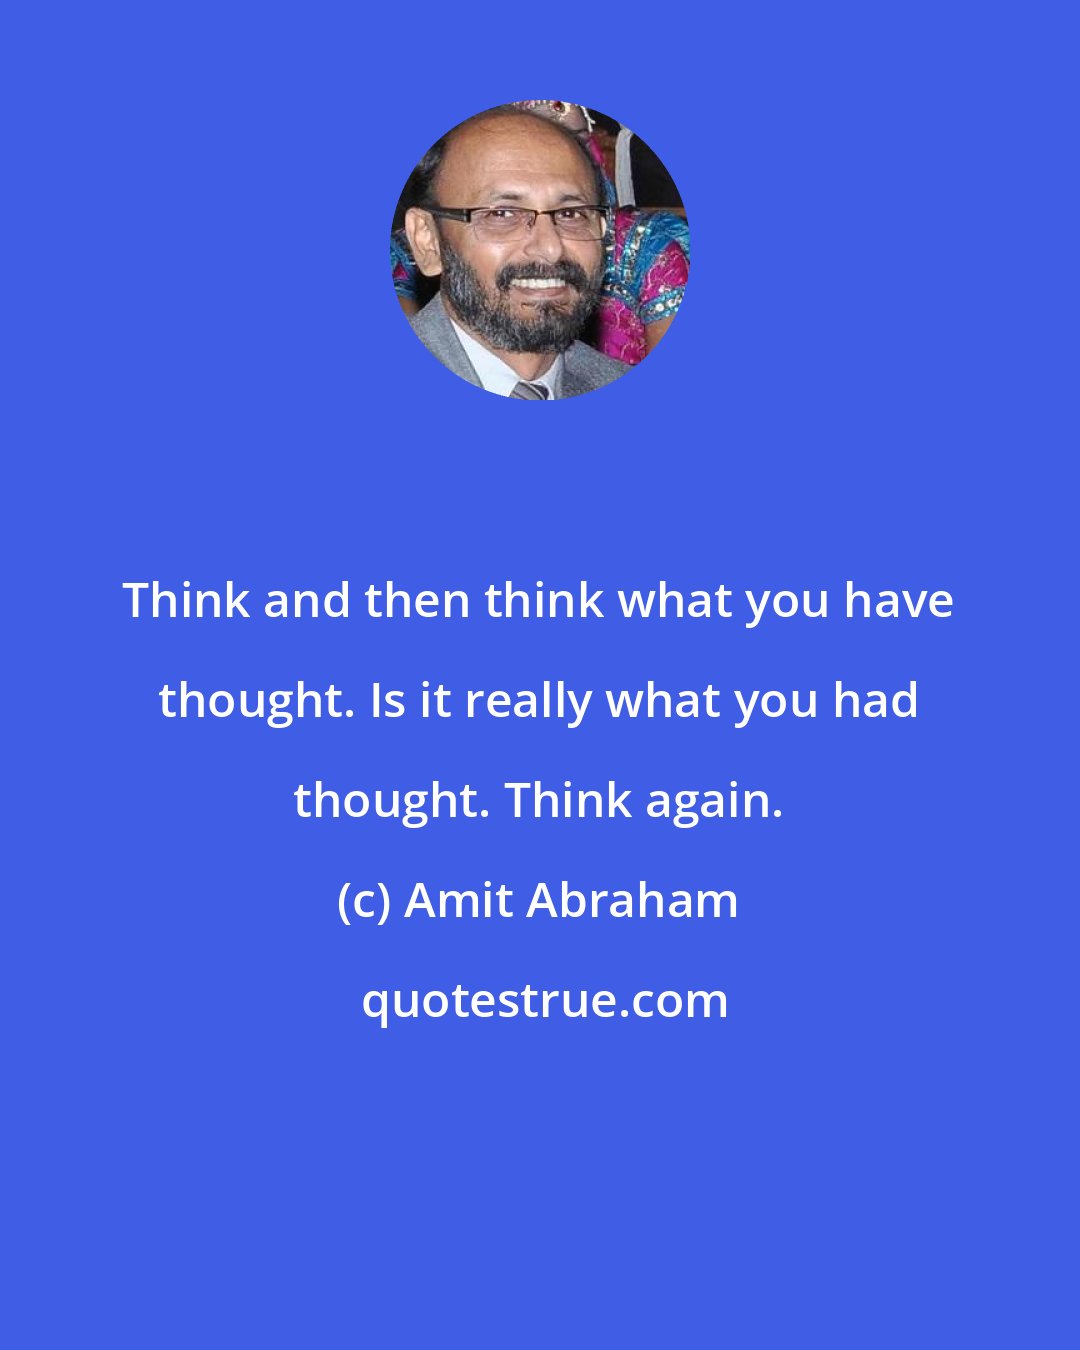 Amit Abraham: Think and then think what you have thought. Is it really what you had thought. Think again.